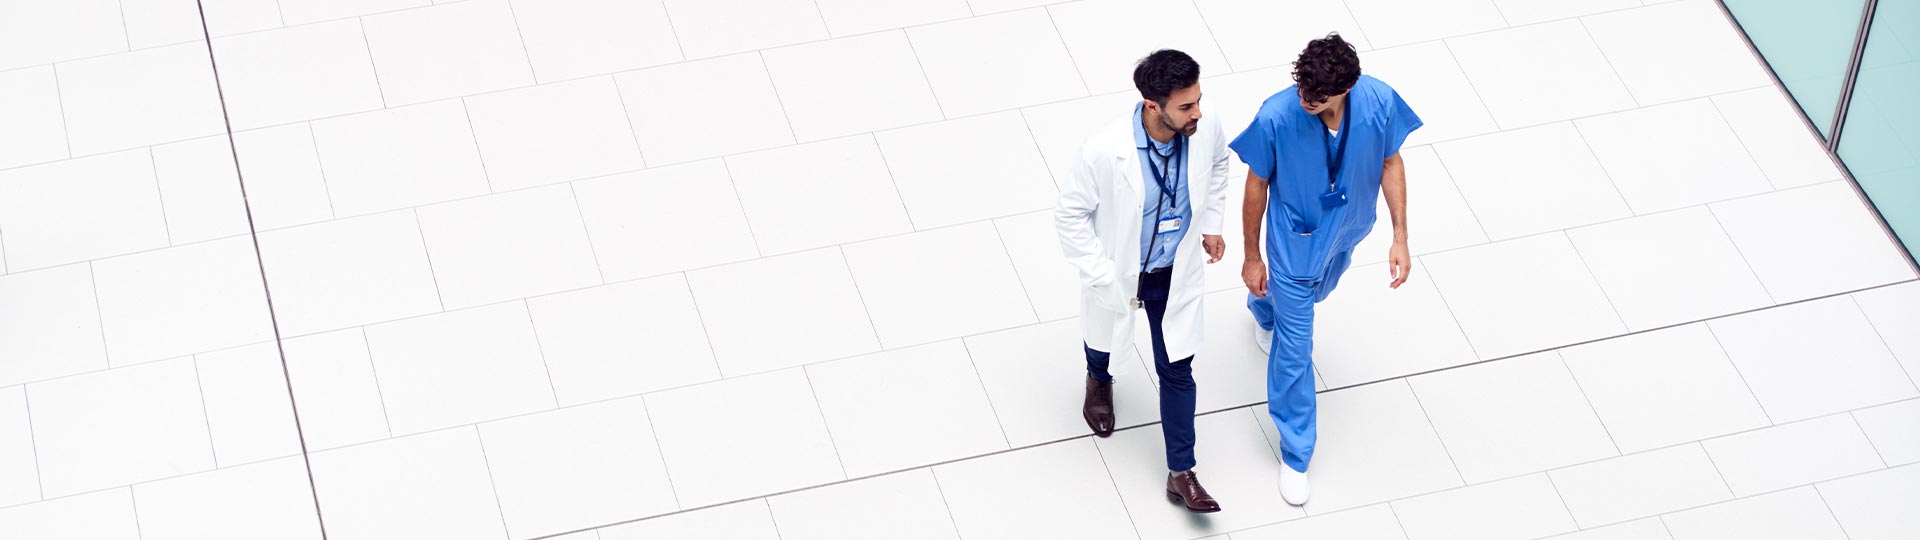 A person in a white coat